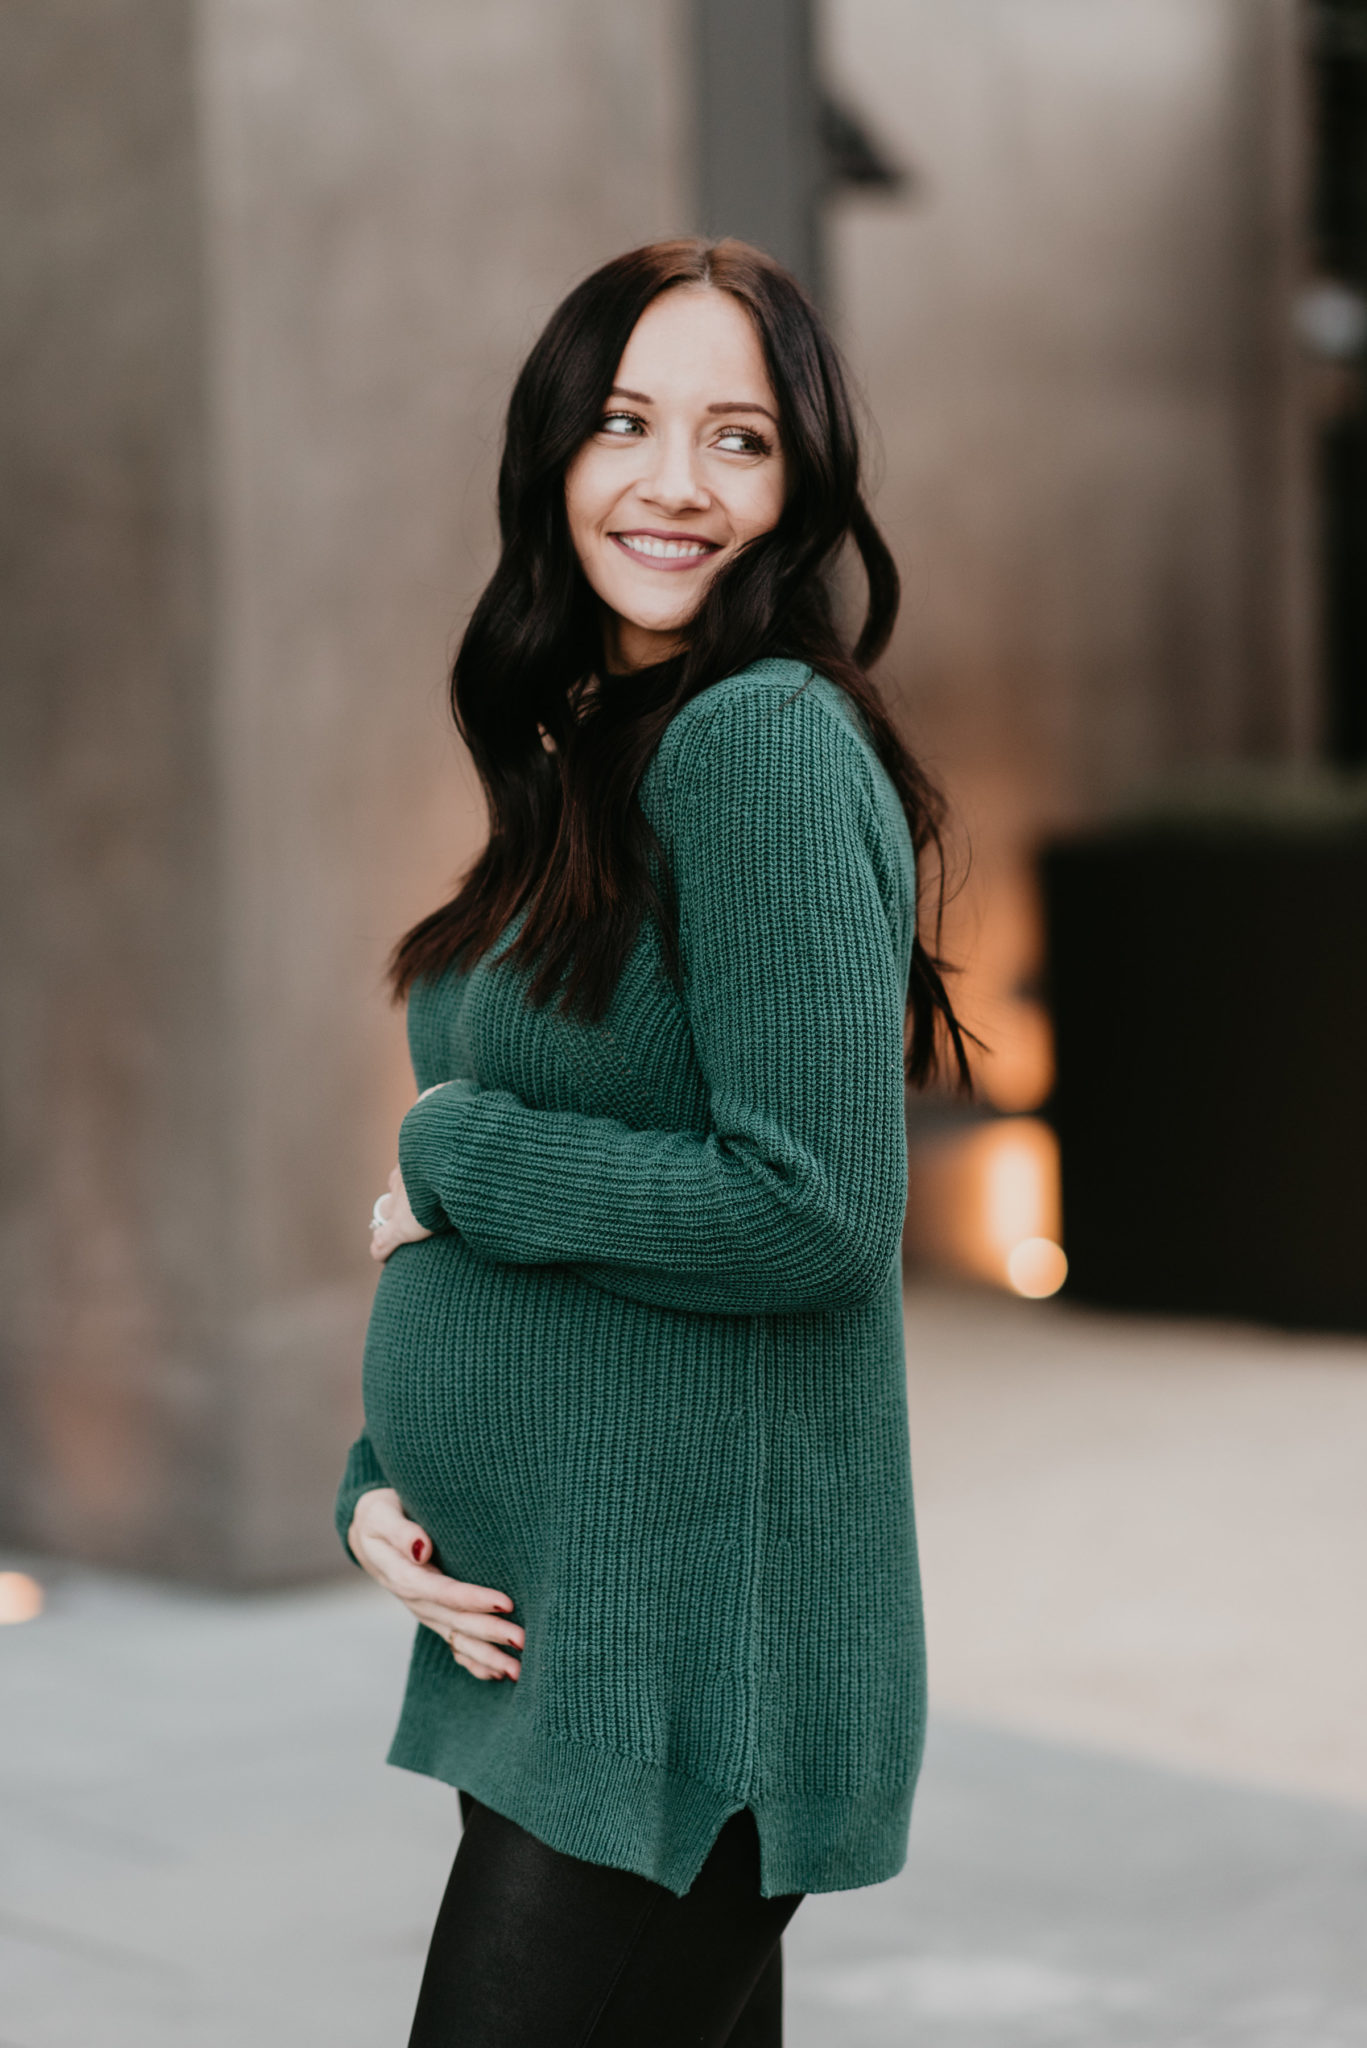 pregnancy outfit idea for second trimester sweater and leggings - My Favorite Winter Sweaters All Under $50 by popular Las Vegas style blogger Outfits & Outings